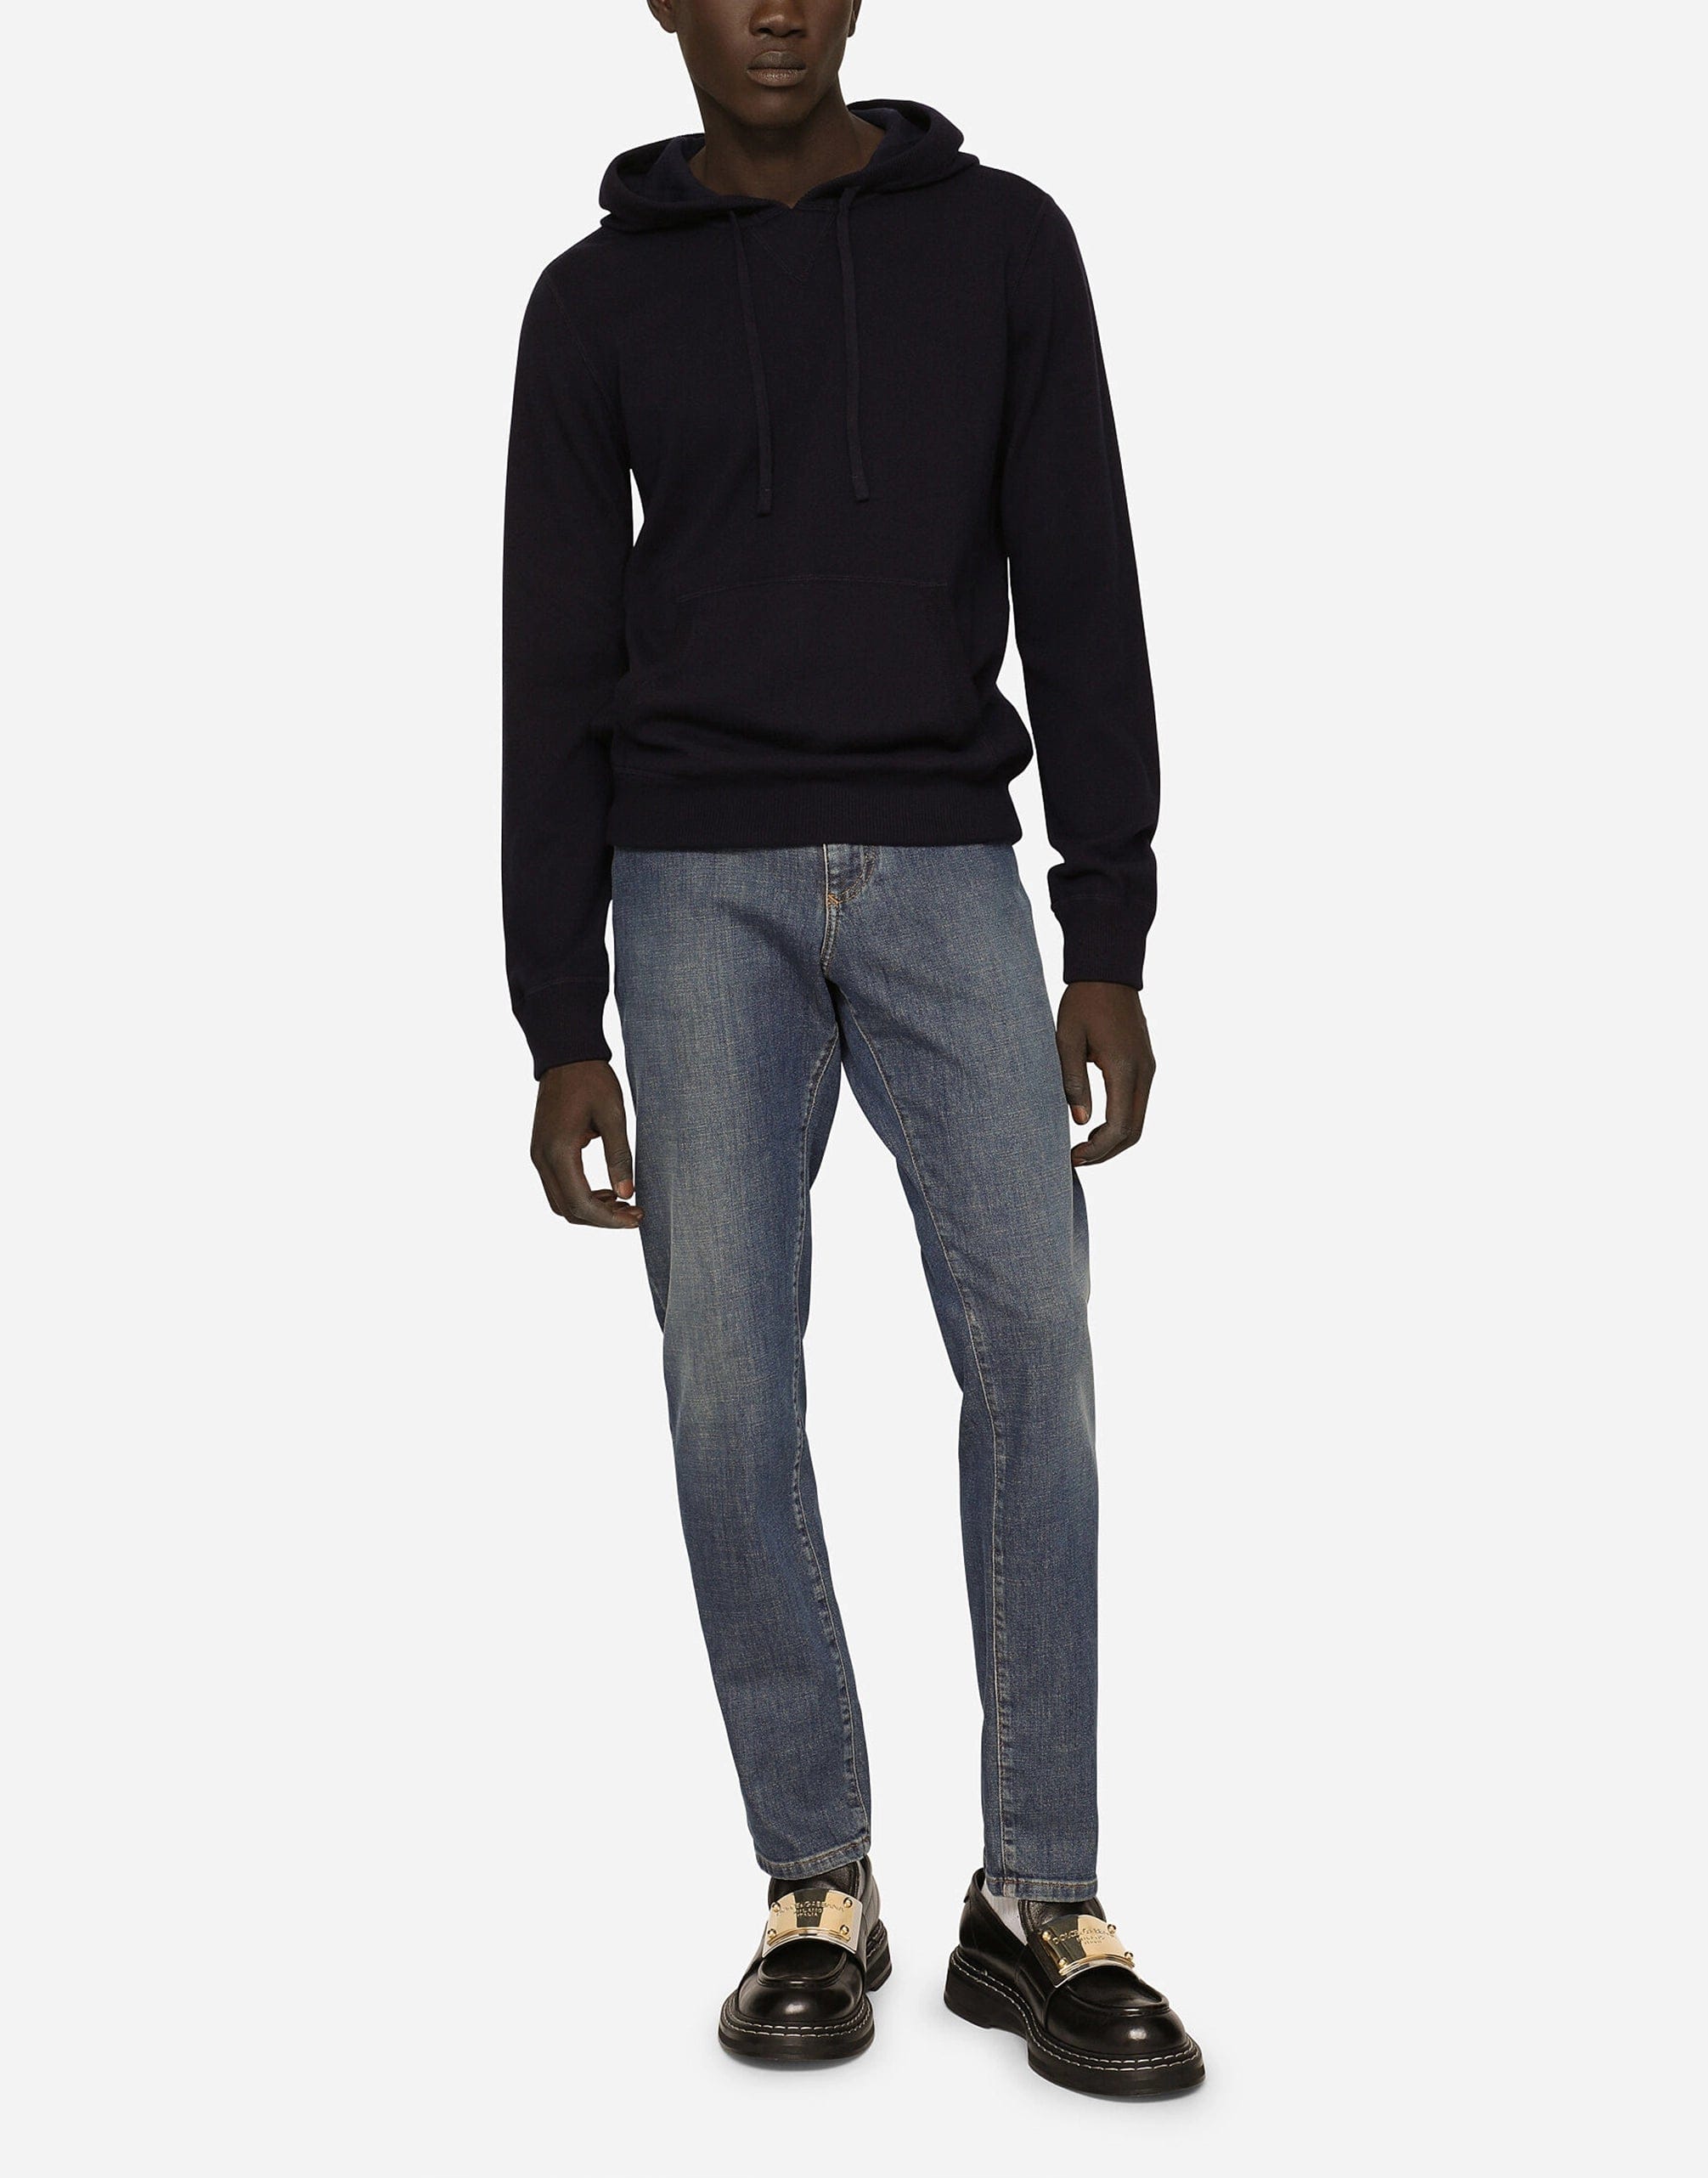 Dolce & Gabbana Hooded Cashmere Pullover